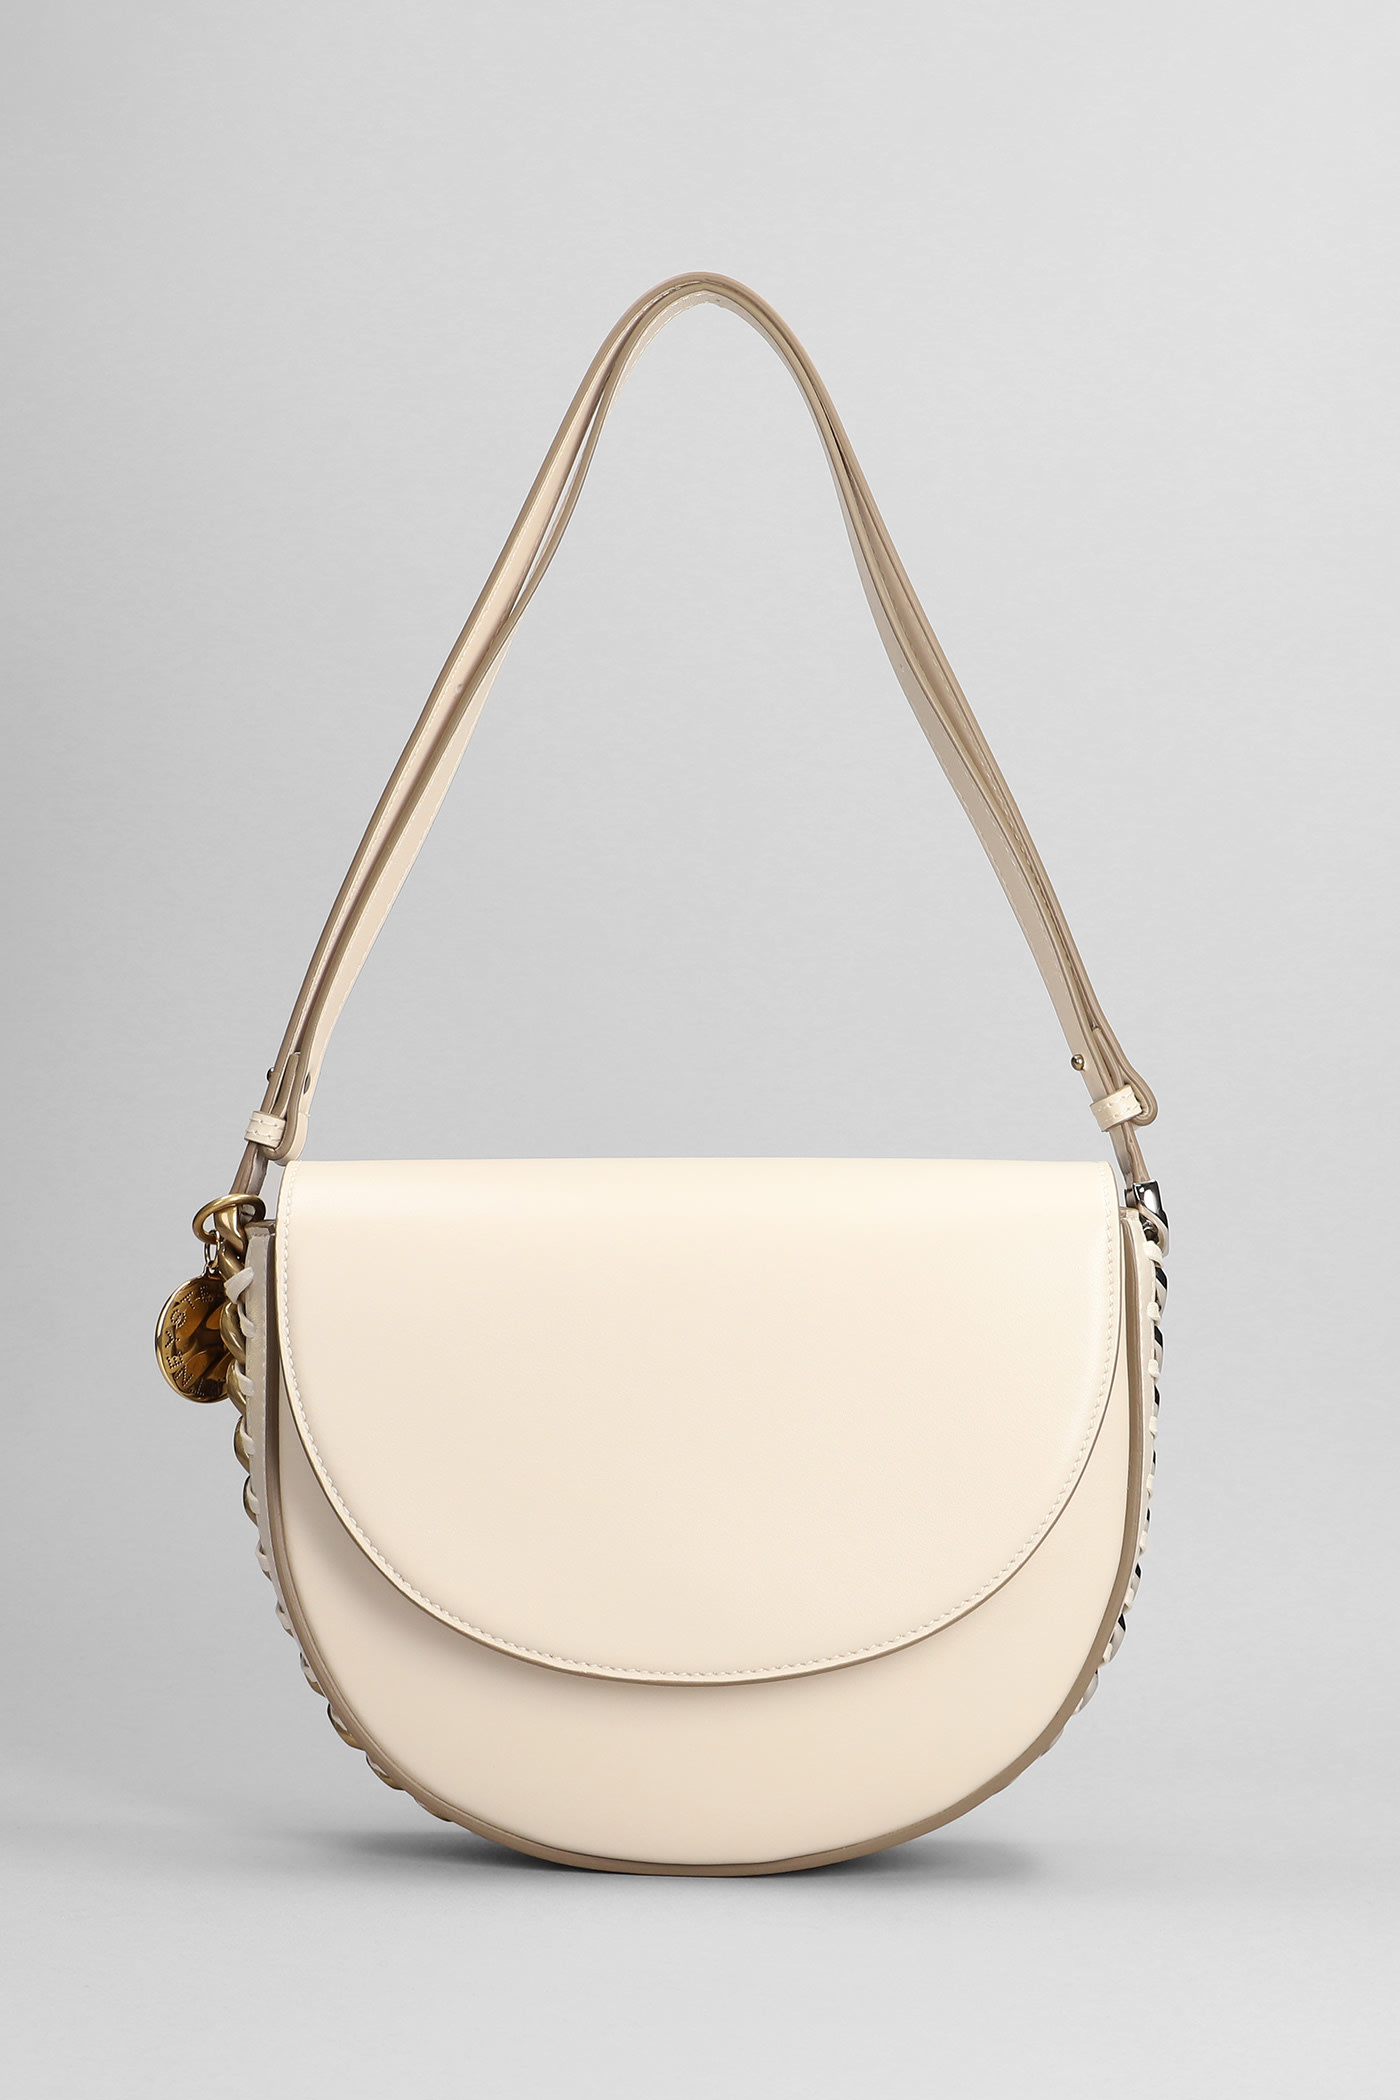 Stella Mccartney Hand Bag In White Faux Leather